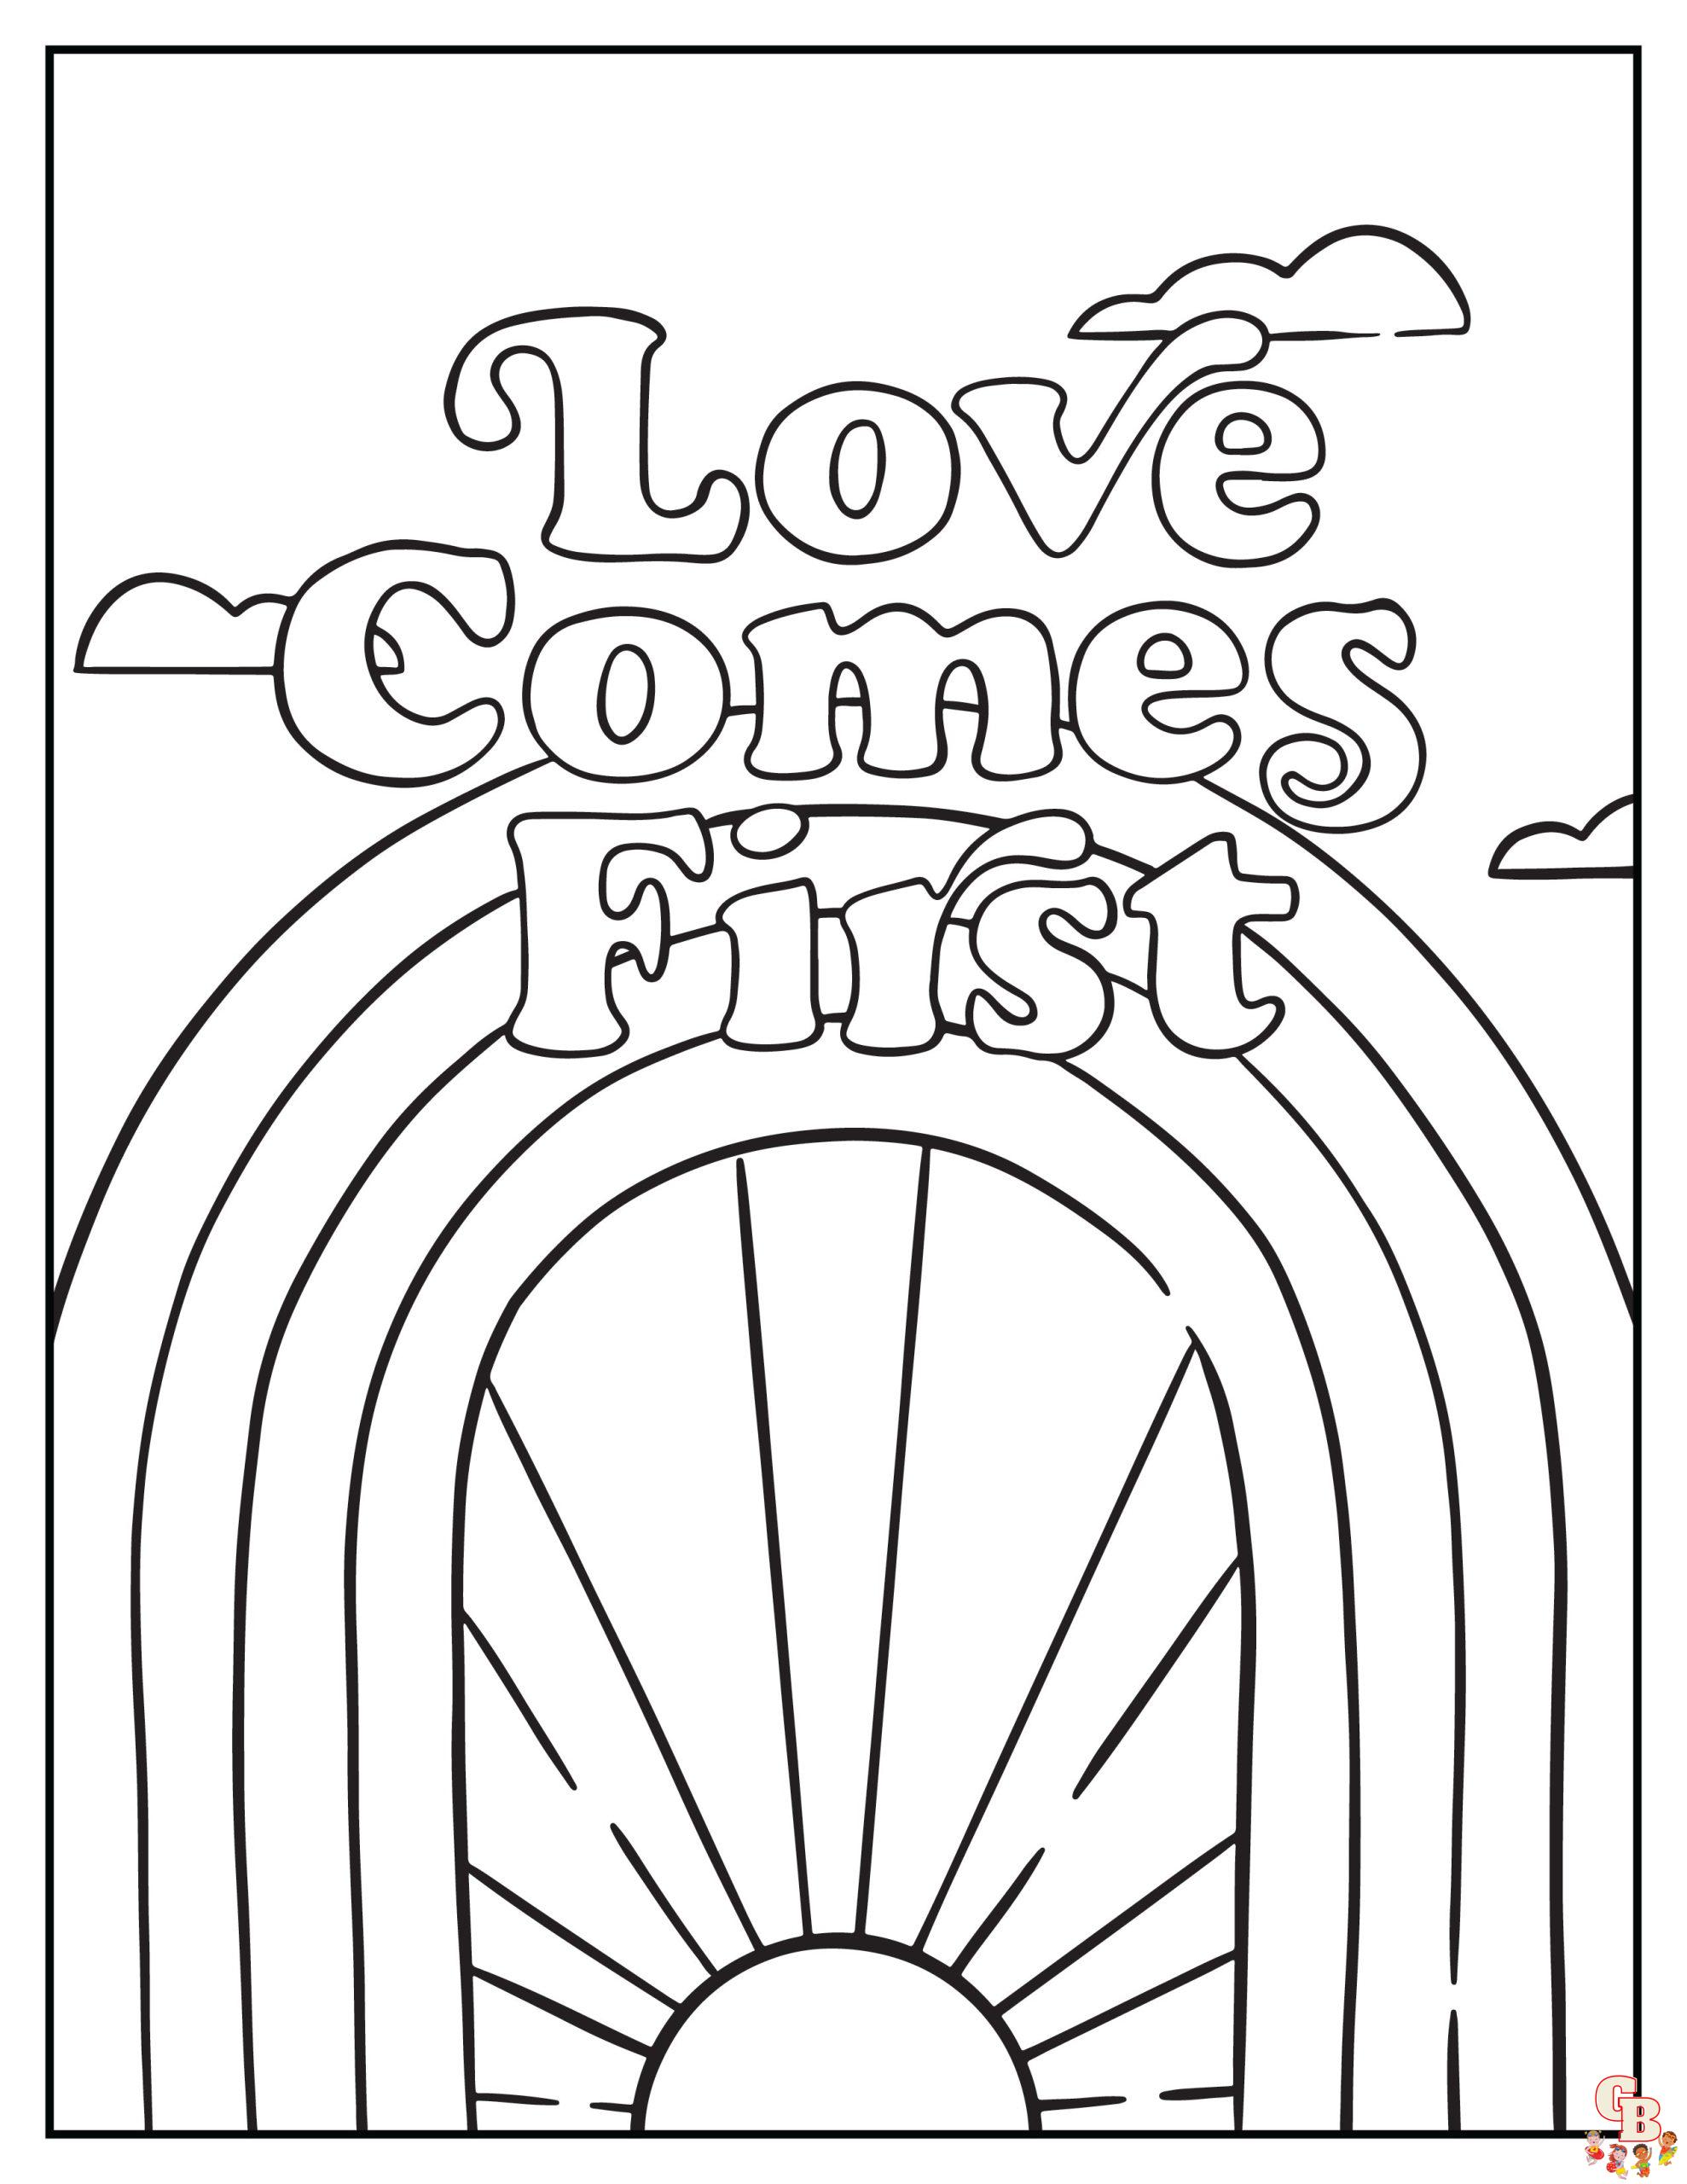 Celebrate diversity with pride coloring pages